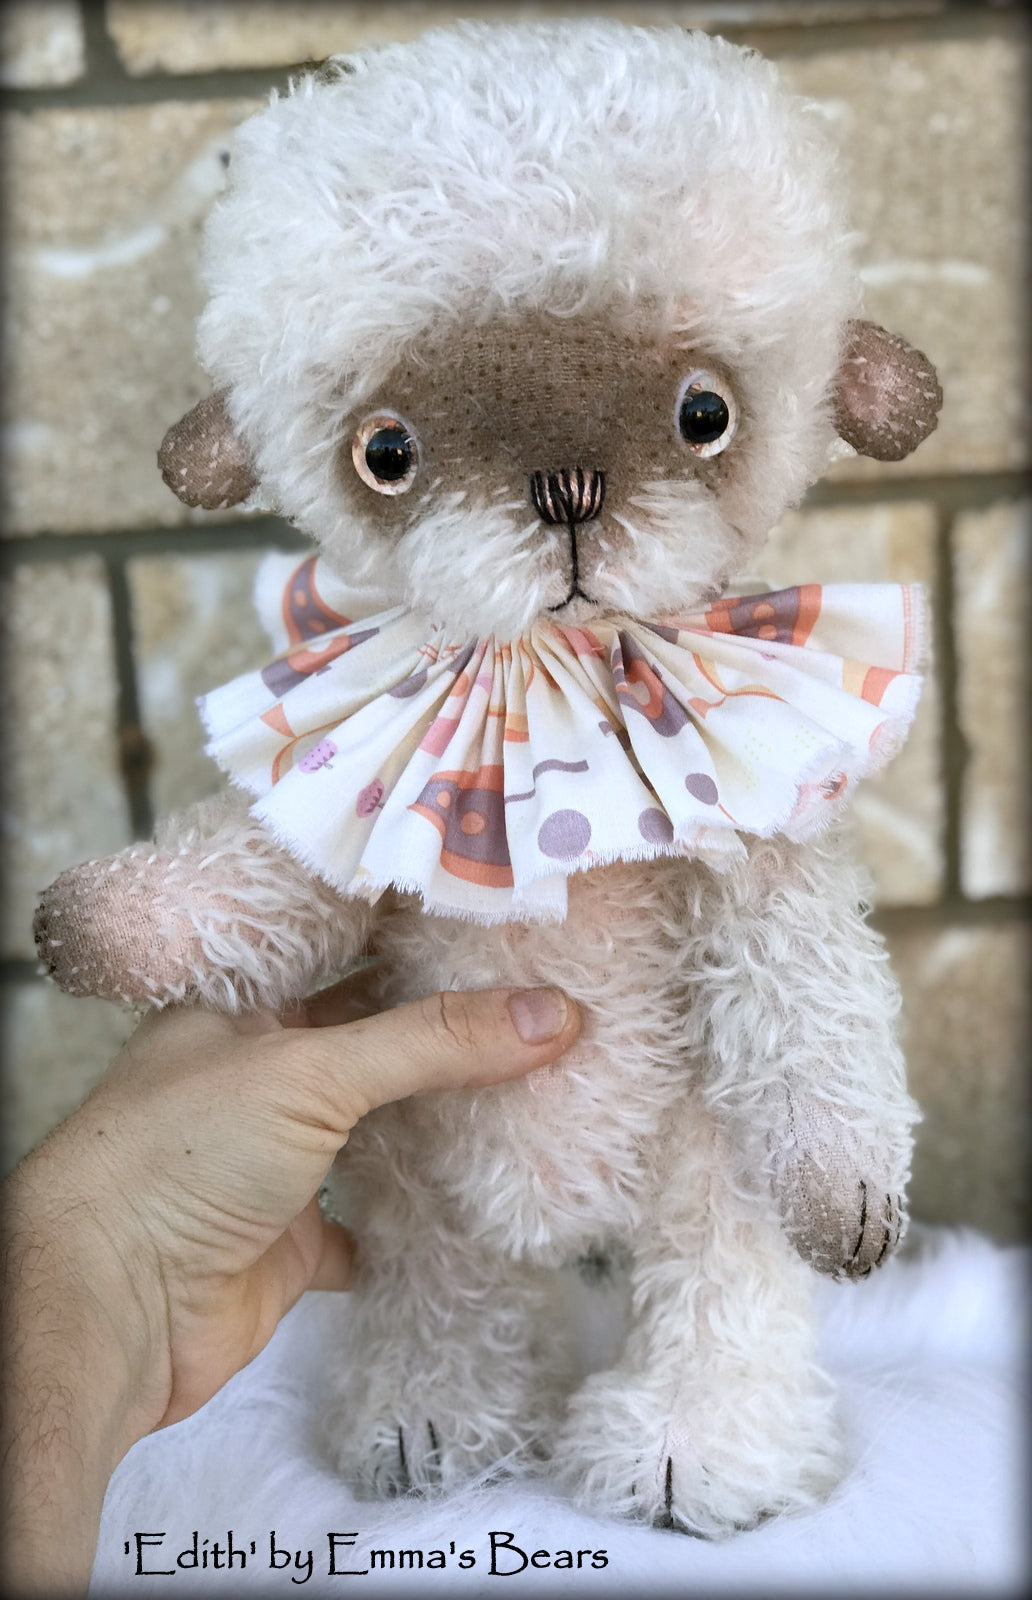 Edith - 13" hand-dyed double thick mohair Artist Bear by Emma's Bears - Limited Edition